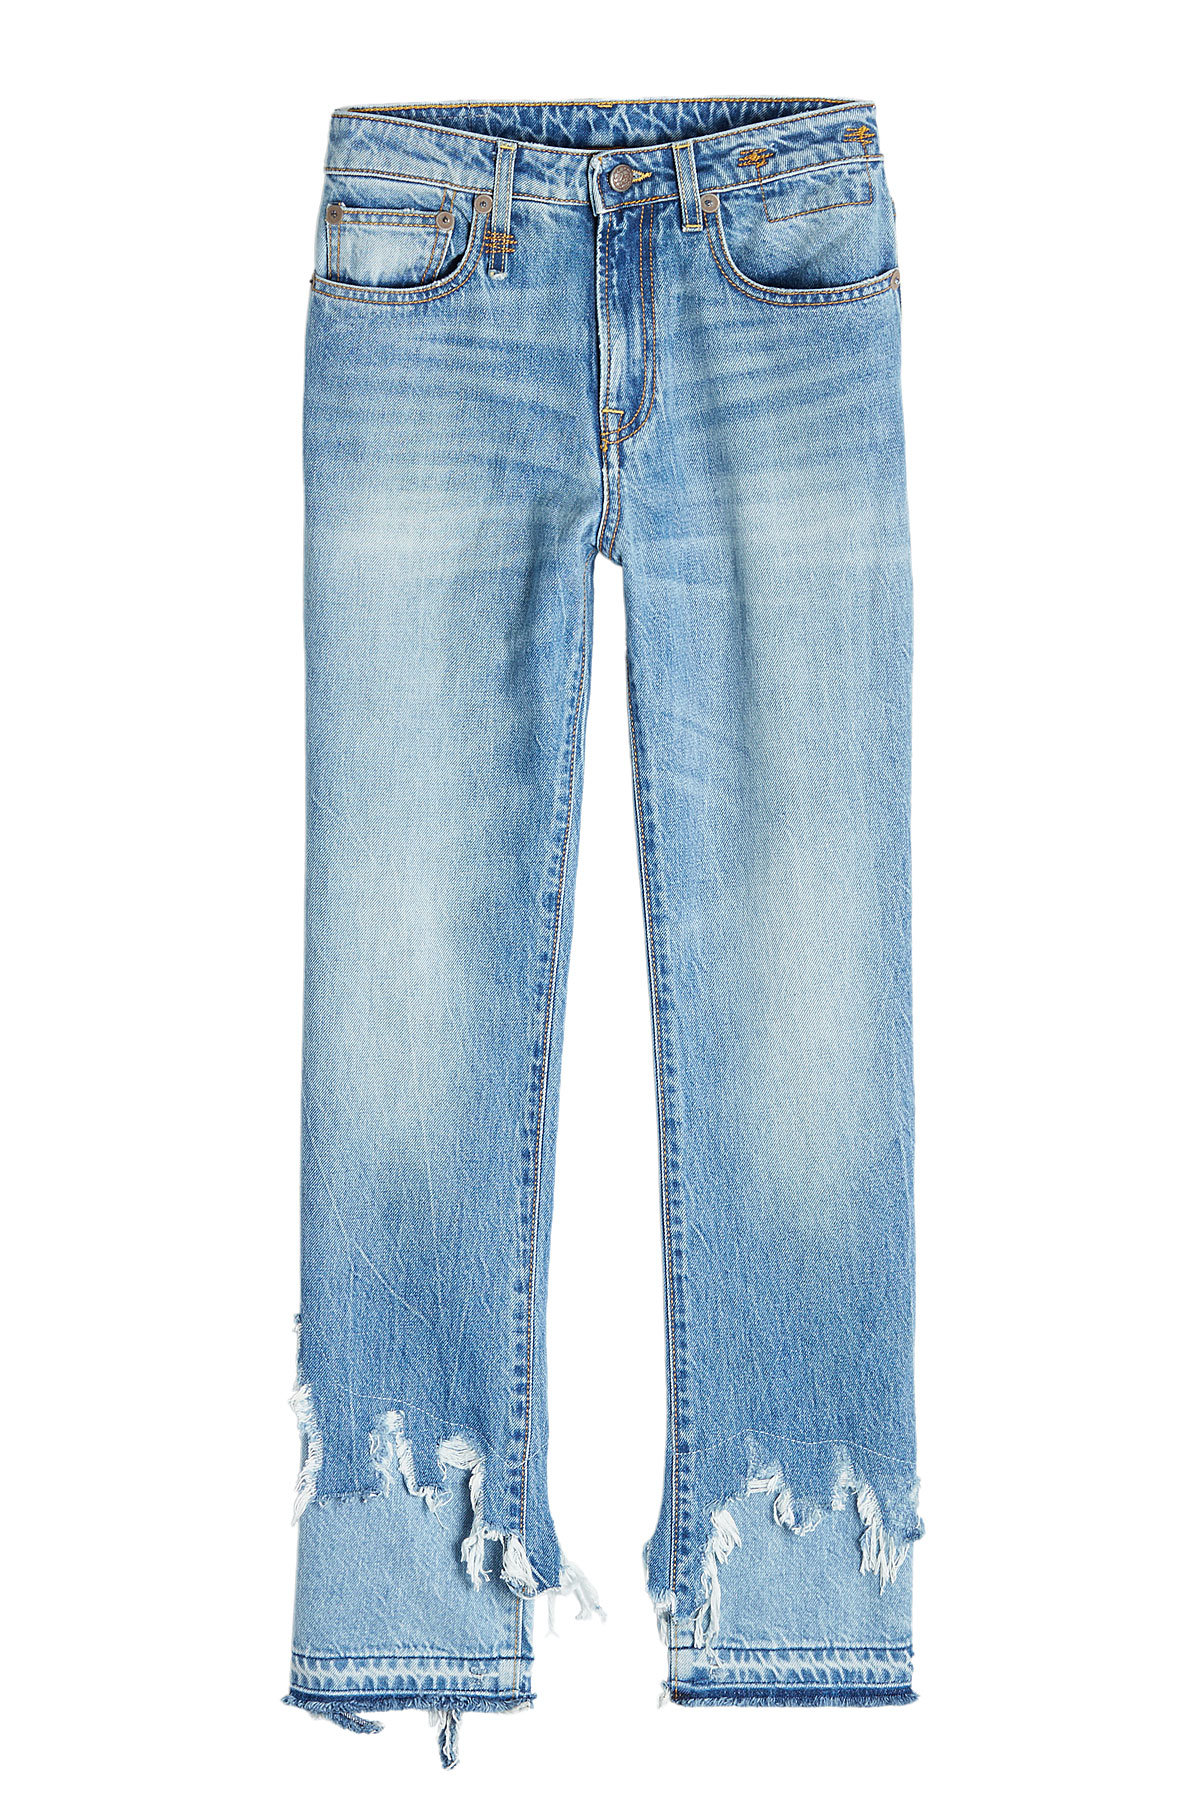 R13 - Double Shredded Jeans